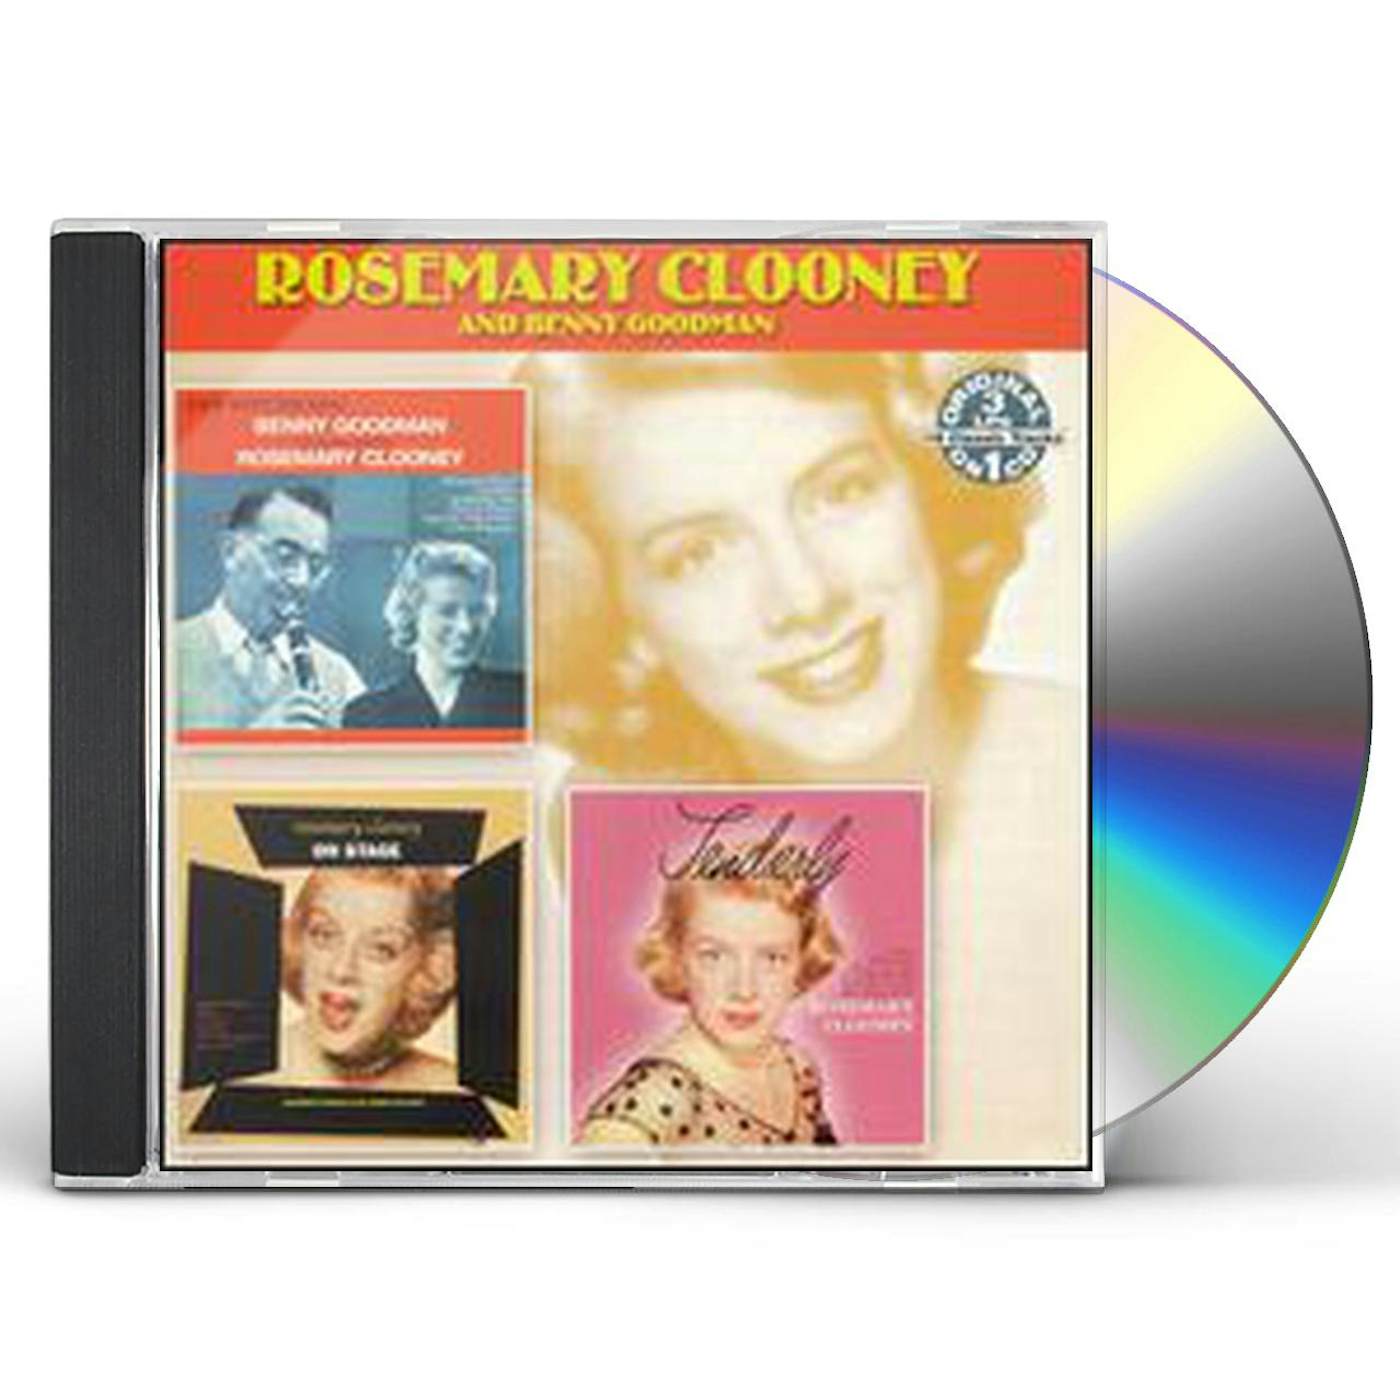 Rosemary Clooney DATE WITH THE KING: ON STAGE TENDERLY CD